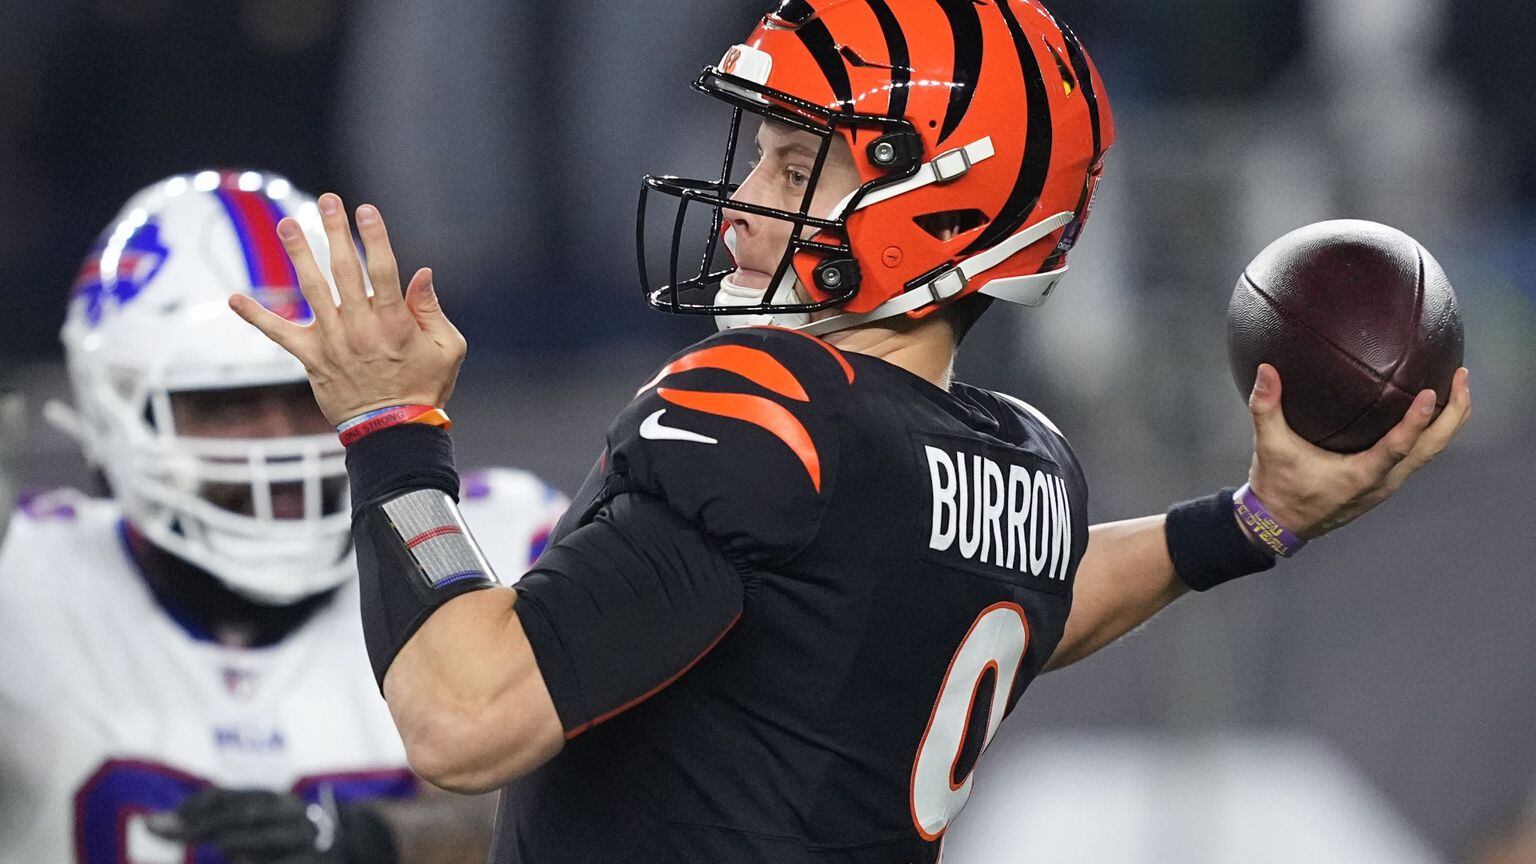 Bengals win AFC North, AFC Championship Game possibly at neutral